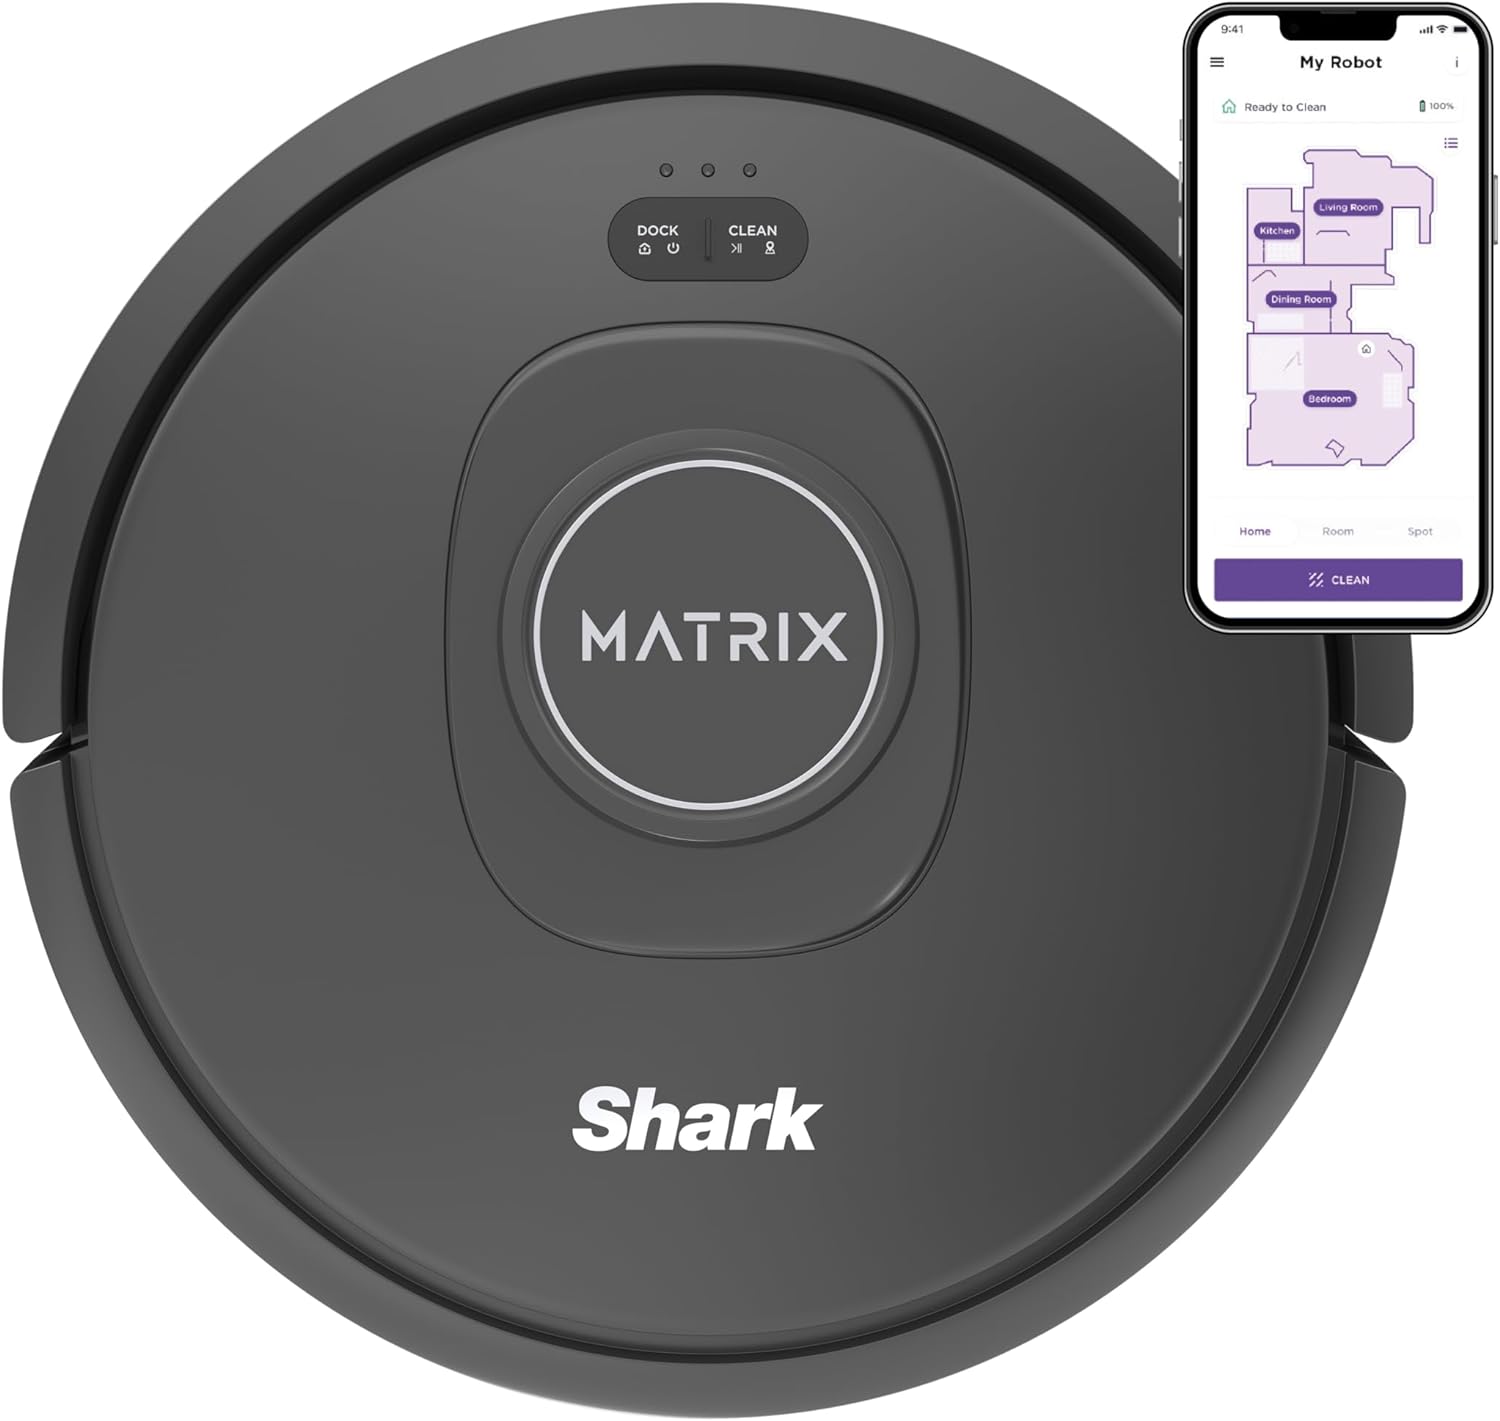 Shark R-RV2310 Matrix Robot Vacuum for Carpets and Hardfloors with Self-Cleaning Brushroll and Precision Mapping - Certified Refurbished